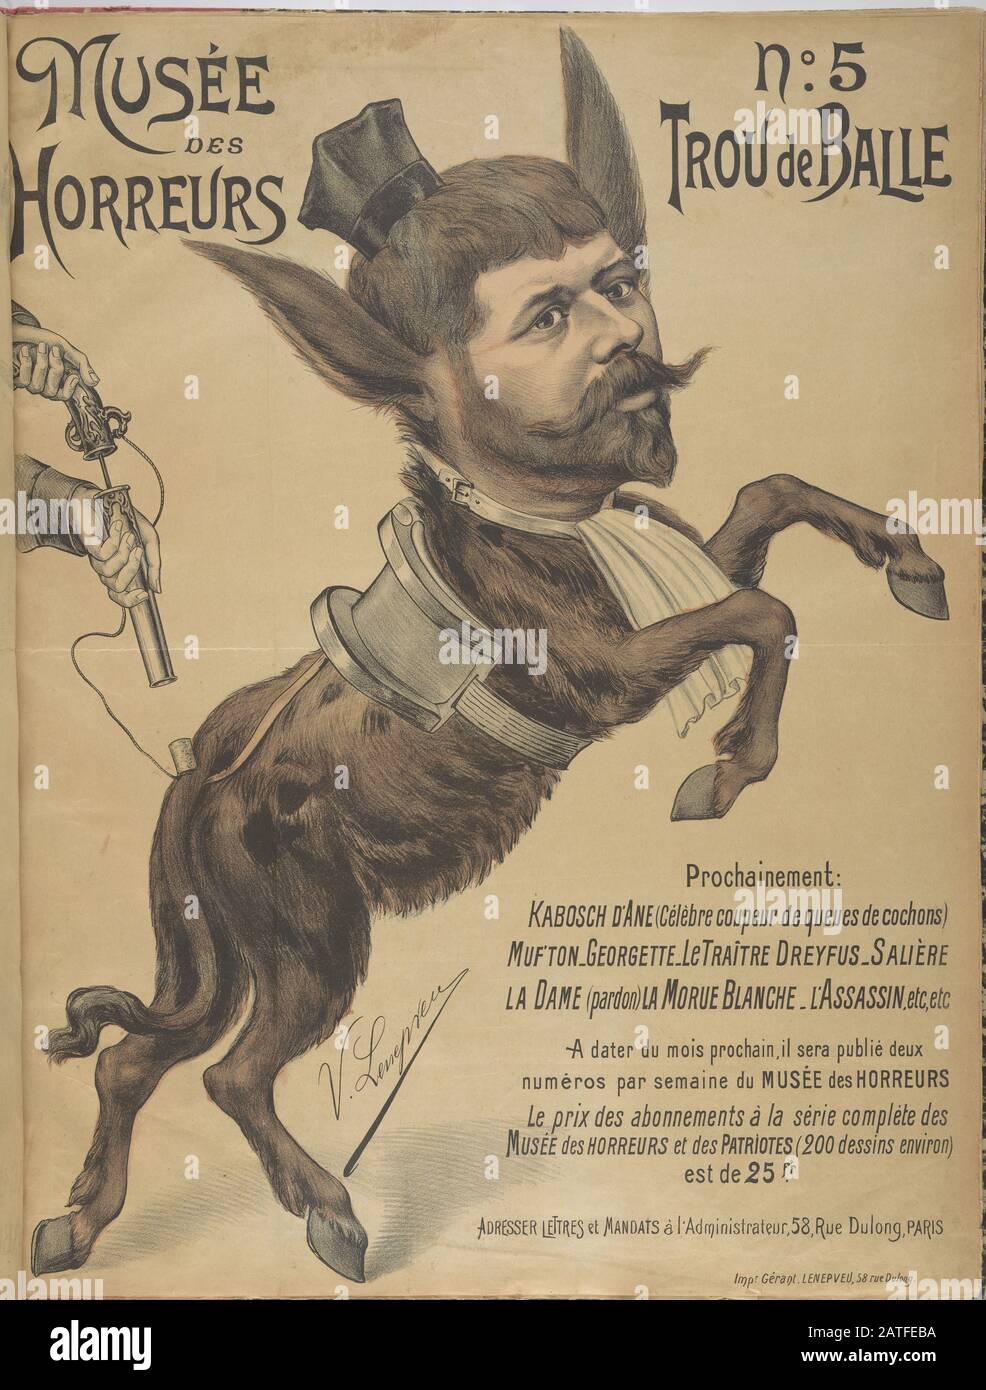 Musée des Horreurs - No. 5 Trou de Balle  -  1899  -  Lenepveu, V.  -  Caricature of Fernand Labori (1860-1917) with a clerical cap and collar, and the body of a donkey. Labori was Dreyfus' defense lawyer. Hand colored. Stock Photo